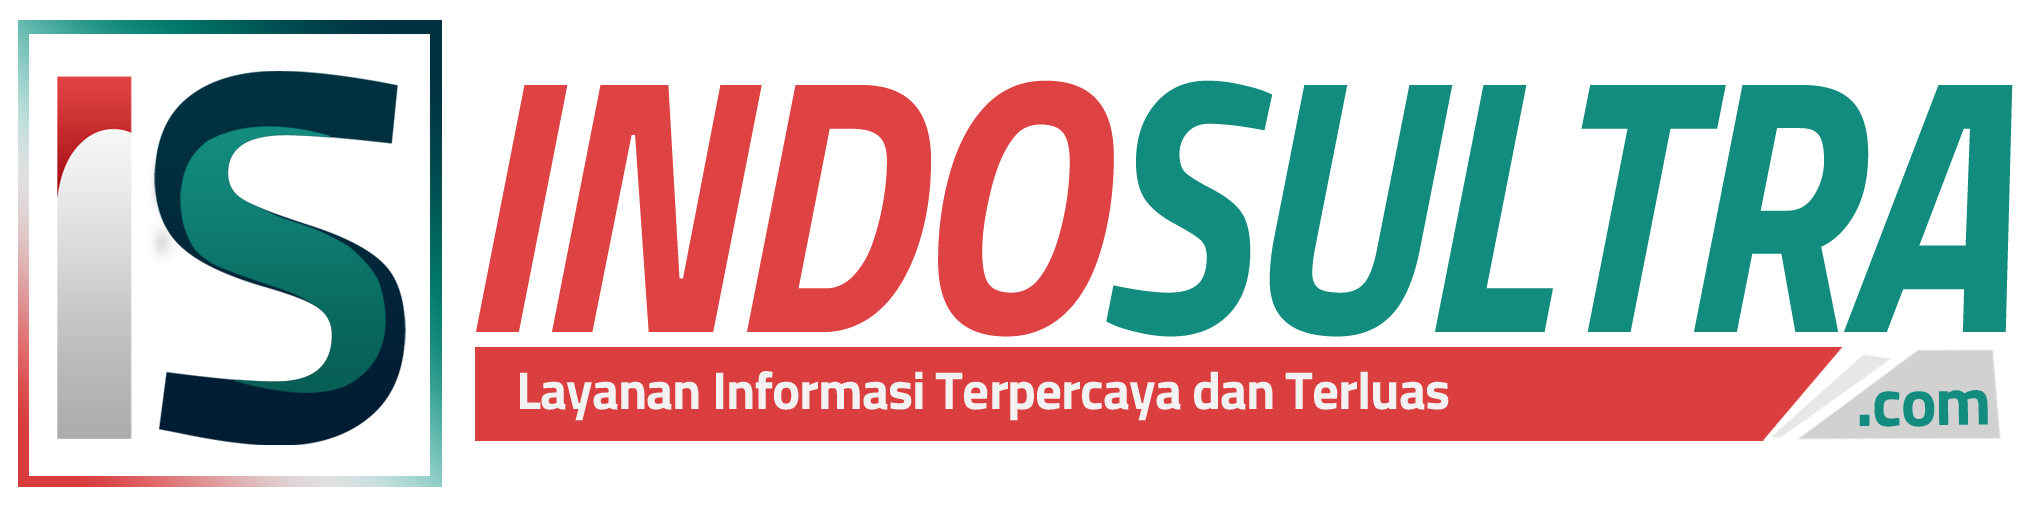 indosultra-web.png